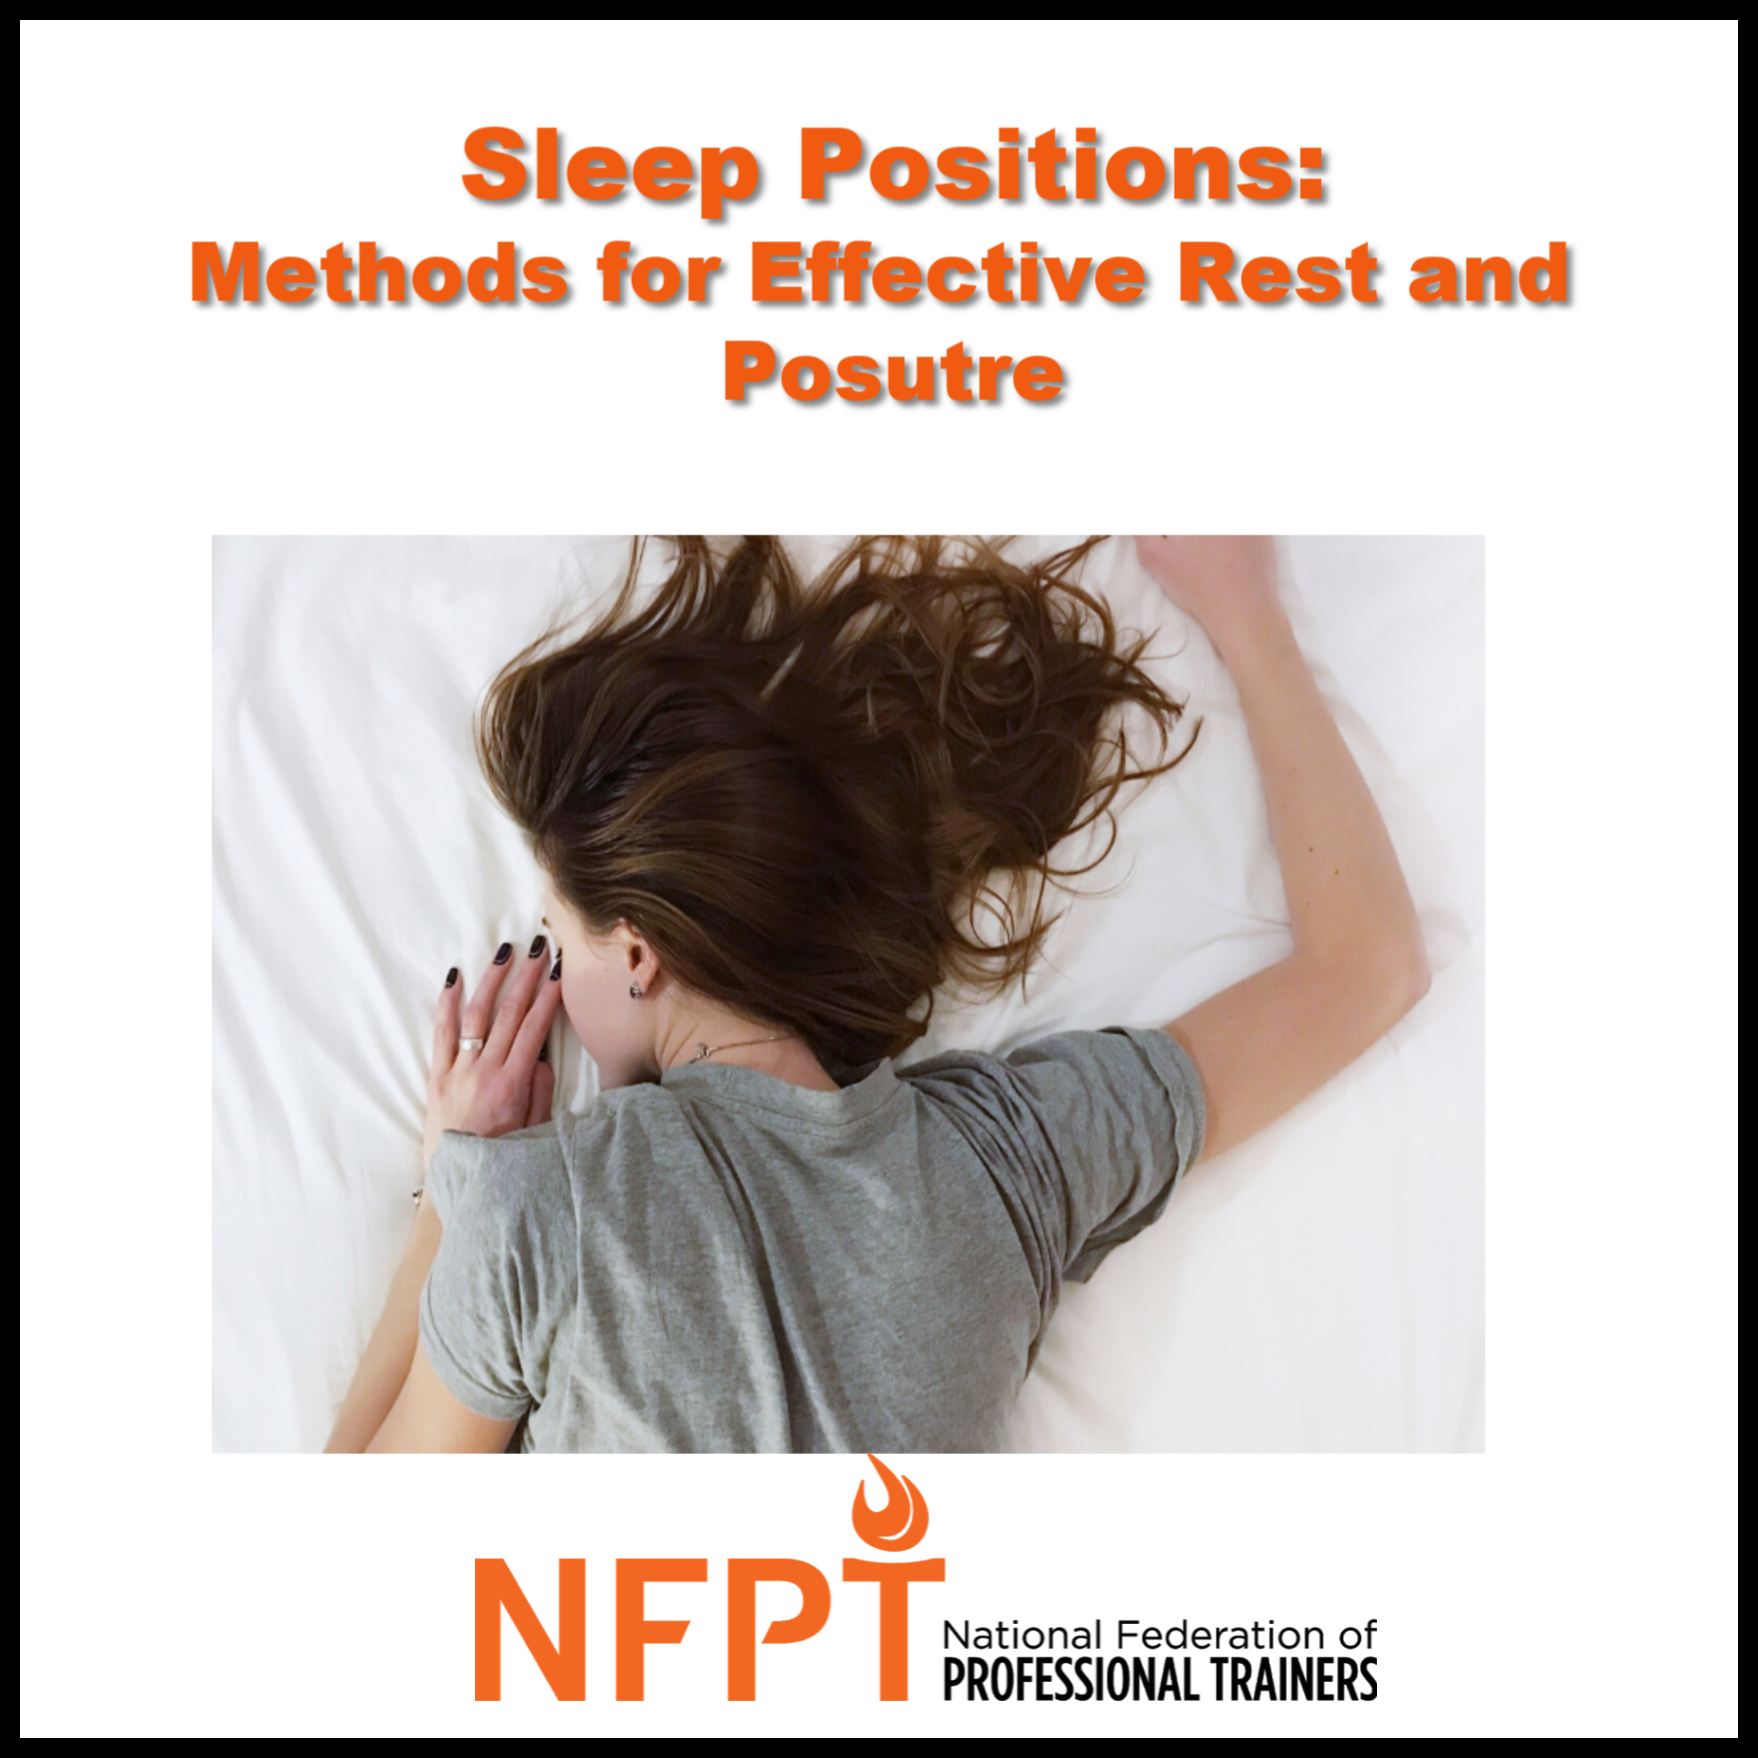 https://www.nfpt.com/wp-content/uploads/Sleep-Positions.png